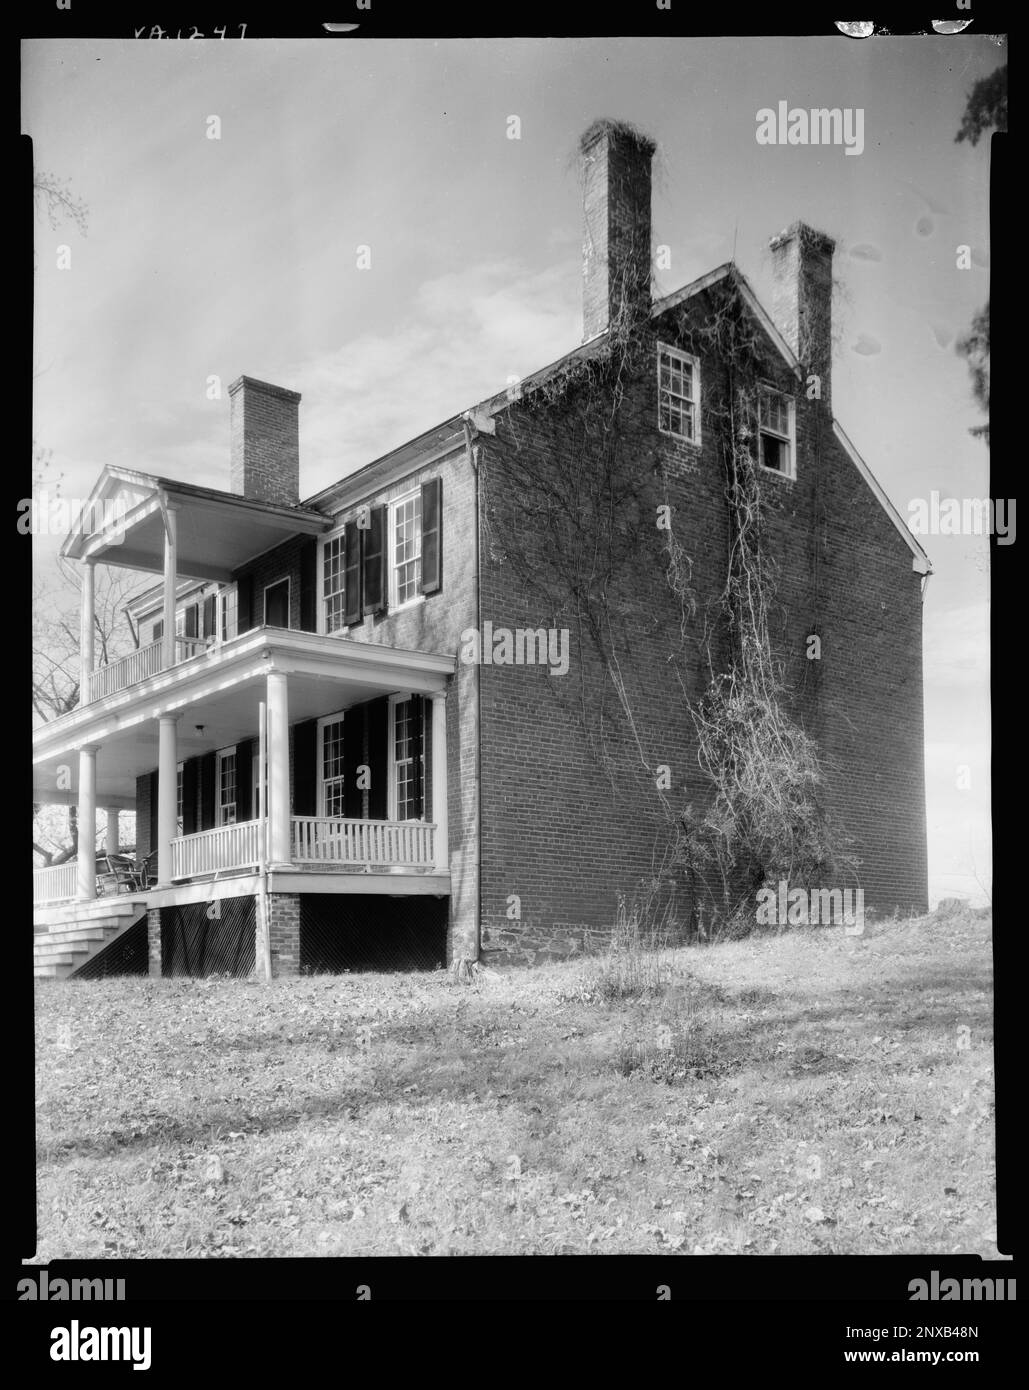 Oglesby, Contea di Albemarle, Virginia. Carnegie Survey of the Architecture of the South. Stati Uniti Virginia Contea di Albemarle, Porches, Chimneys, Houses. Foto Stock